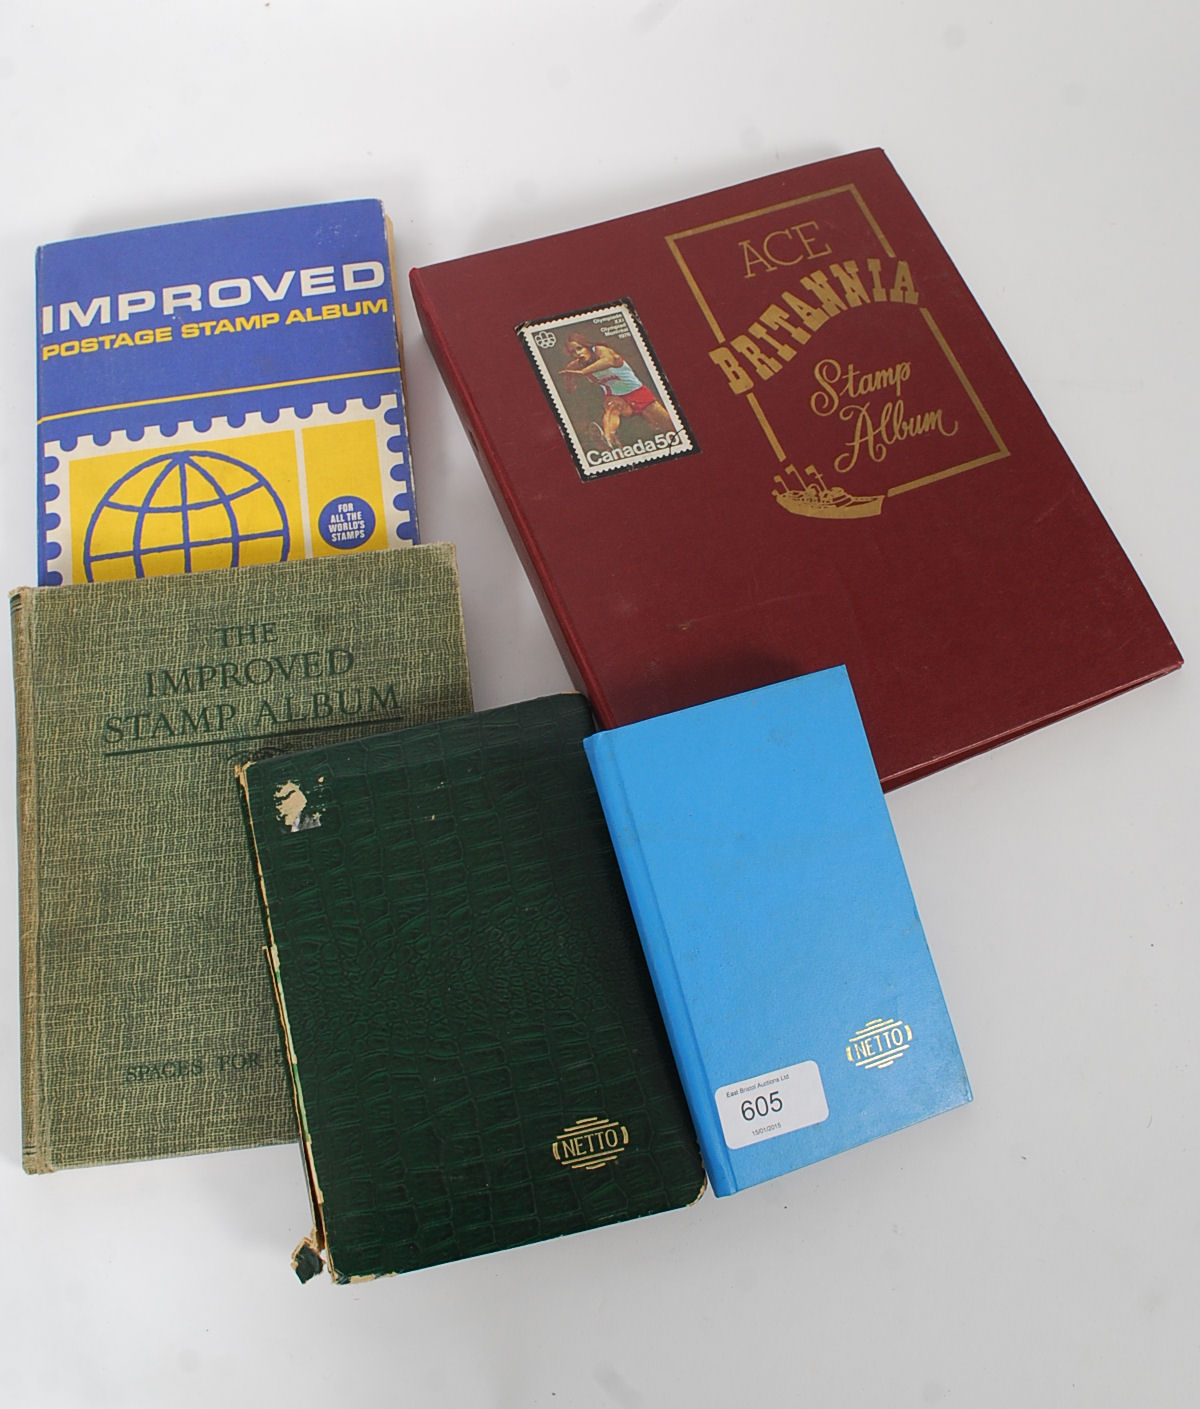 A collection of five vintage stamp album